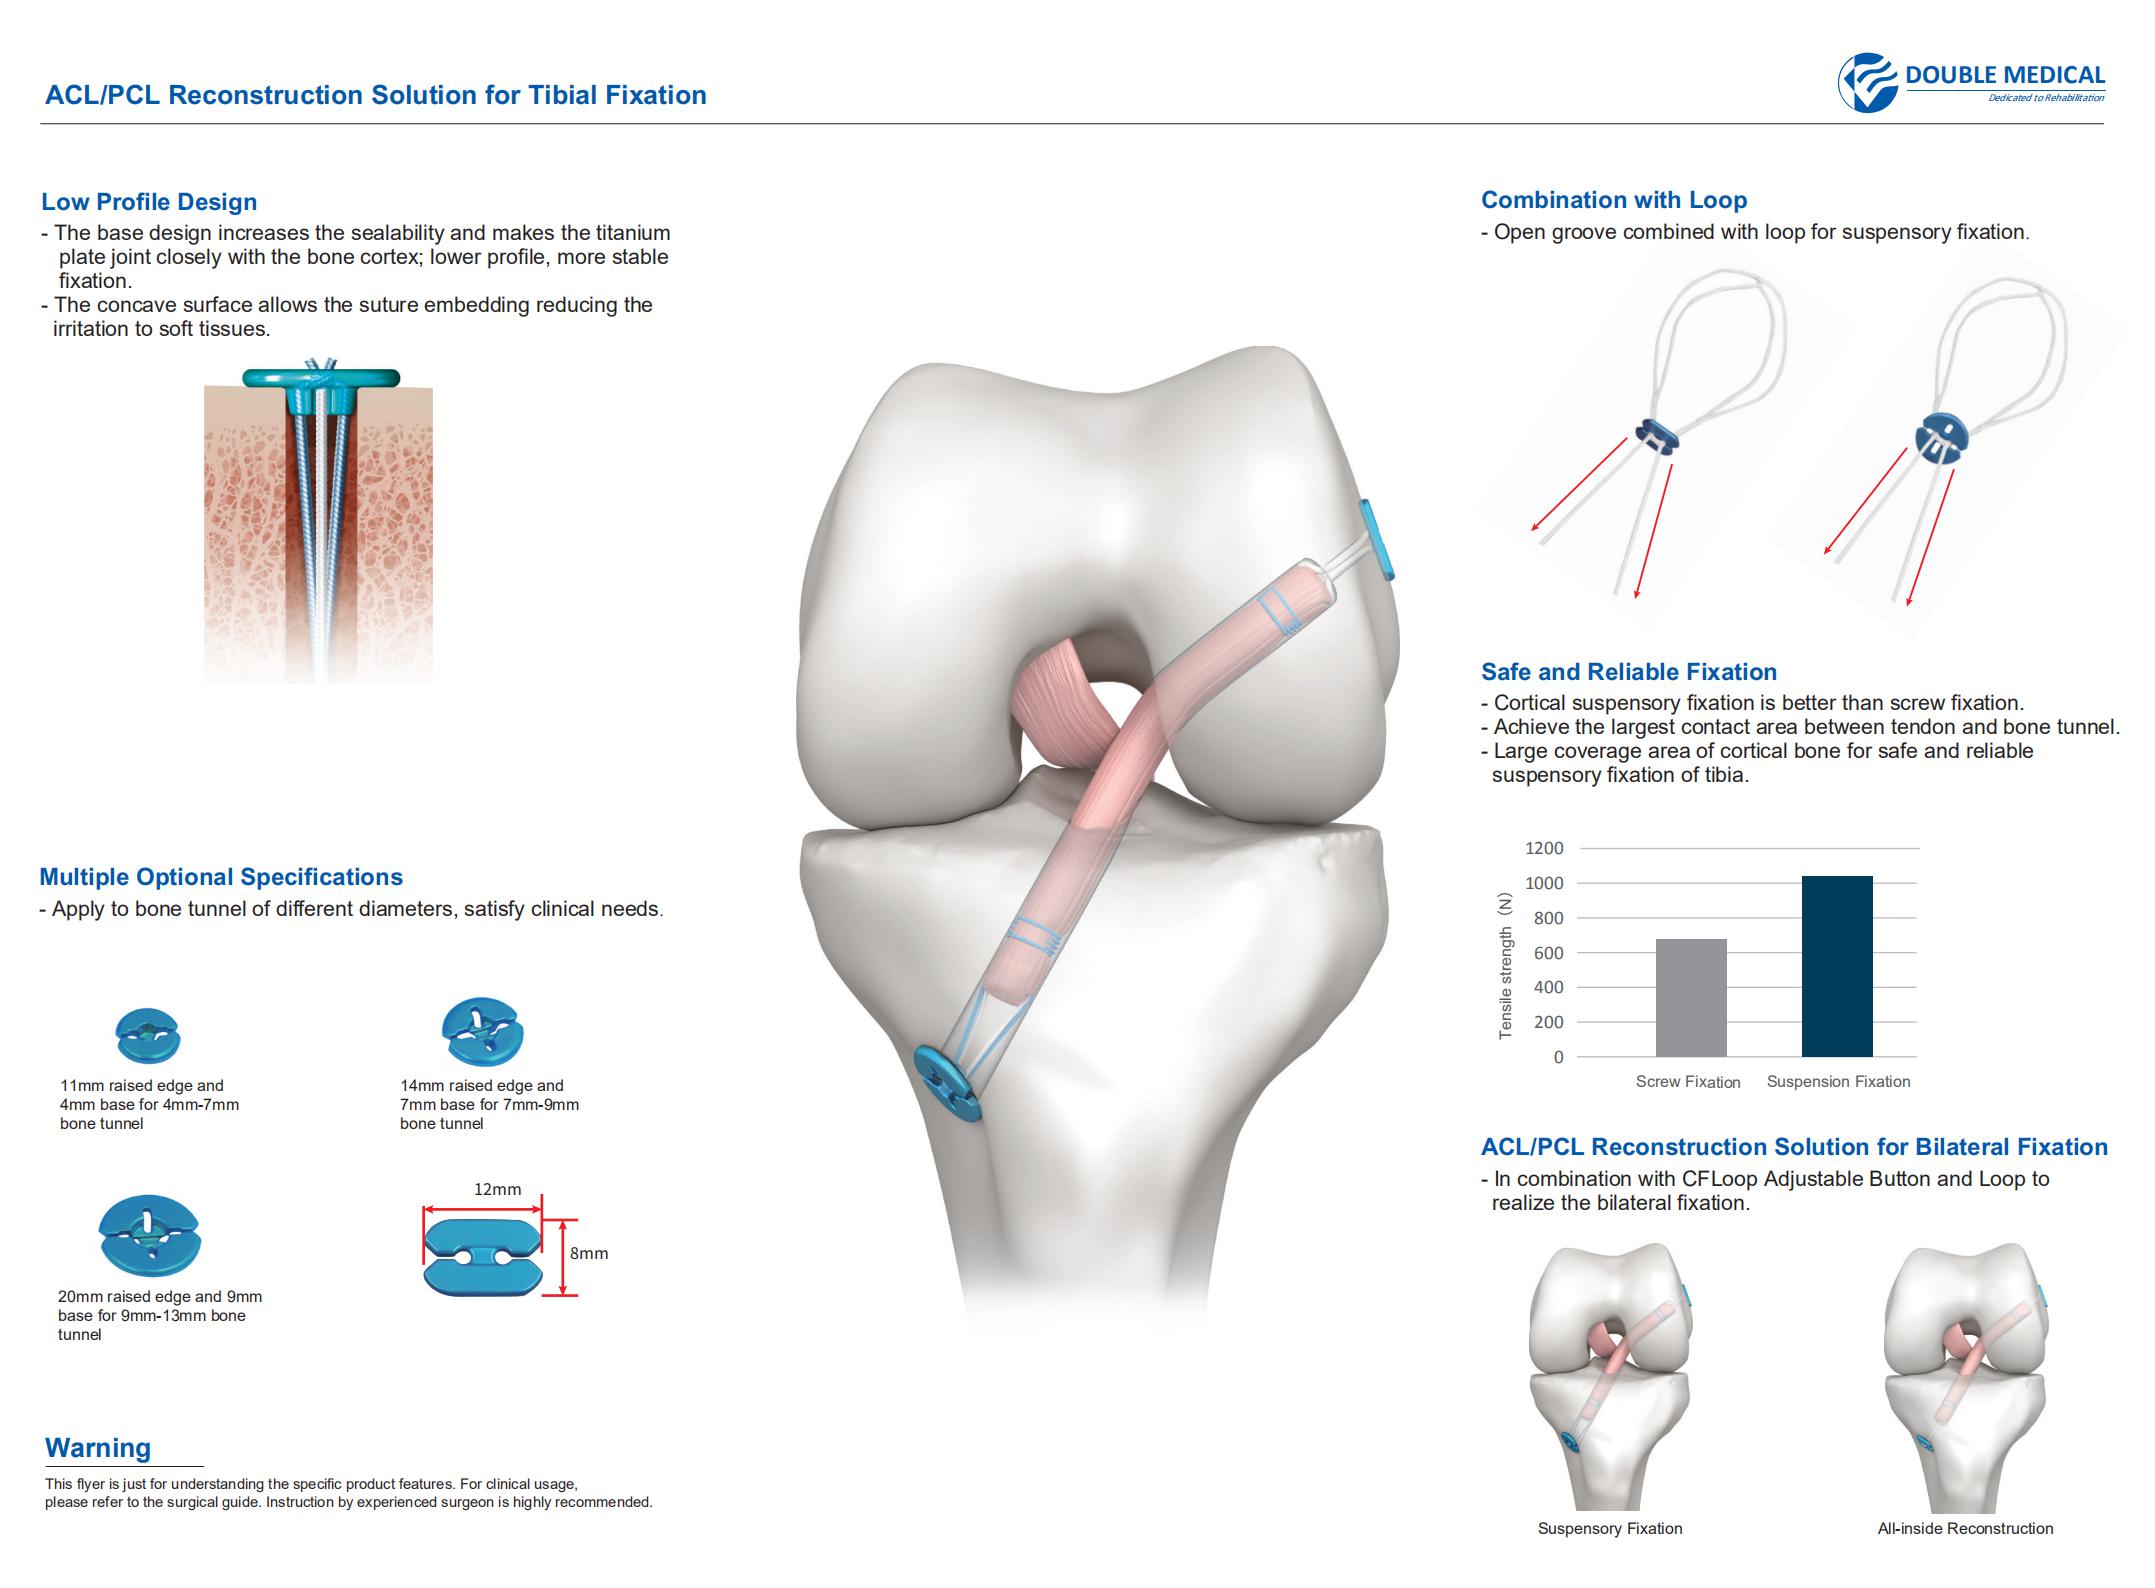 ACL/PCL reconstruction solution for tibial fixation